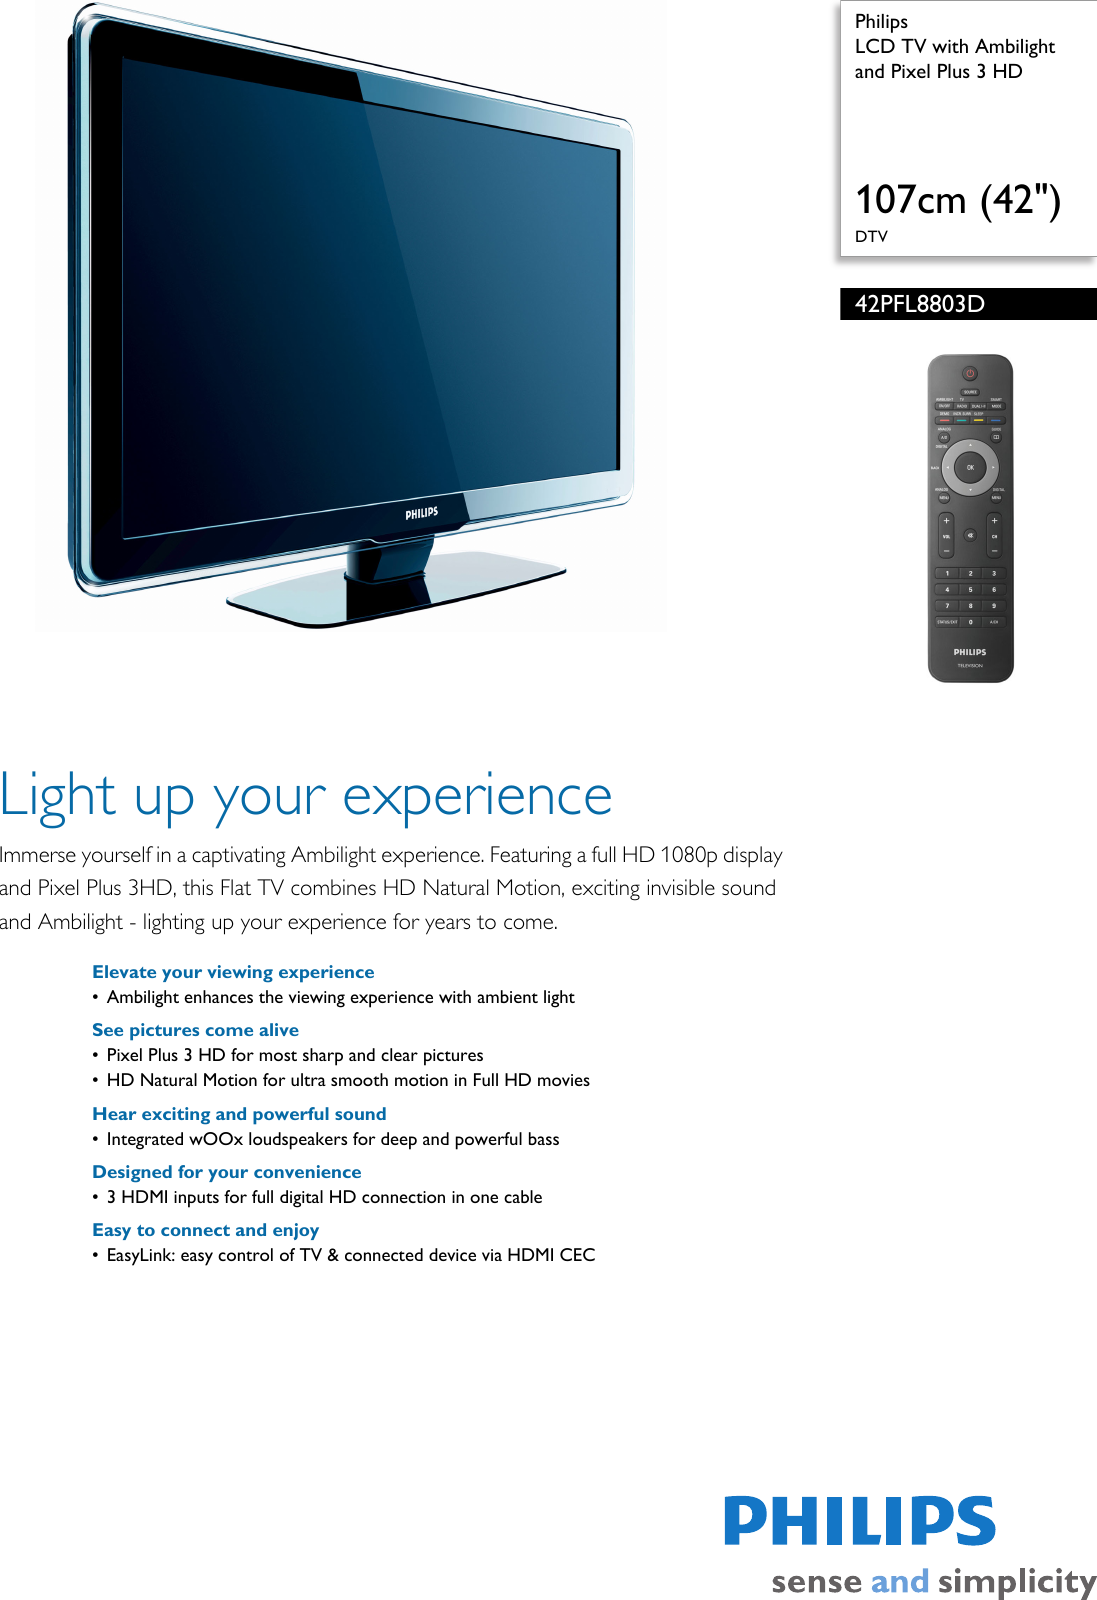 Page 1 of 3 - Philips 42PFL8803D/30 LCD TV With Ambilight And Pixel Plus 3 HD User Manual Leaflet 42pfl8803d 30 Pss Aenhk